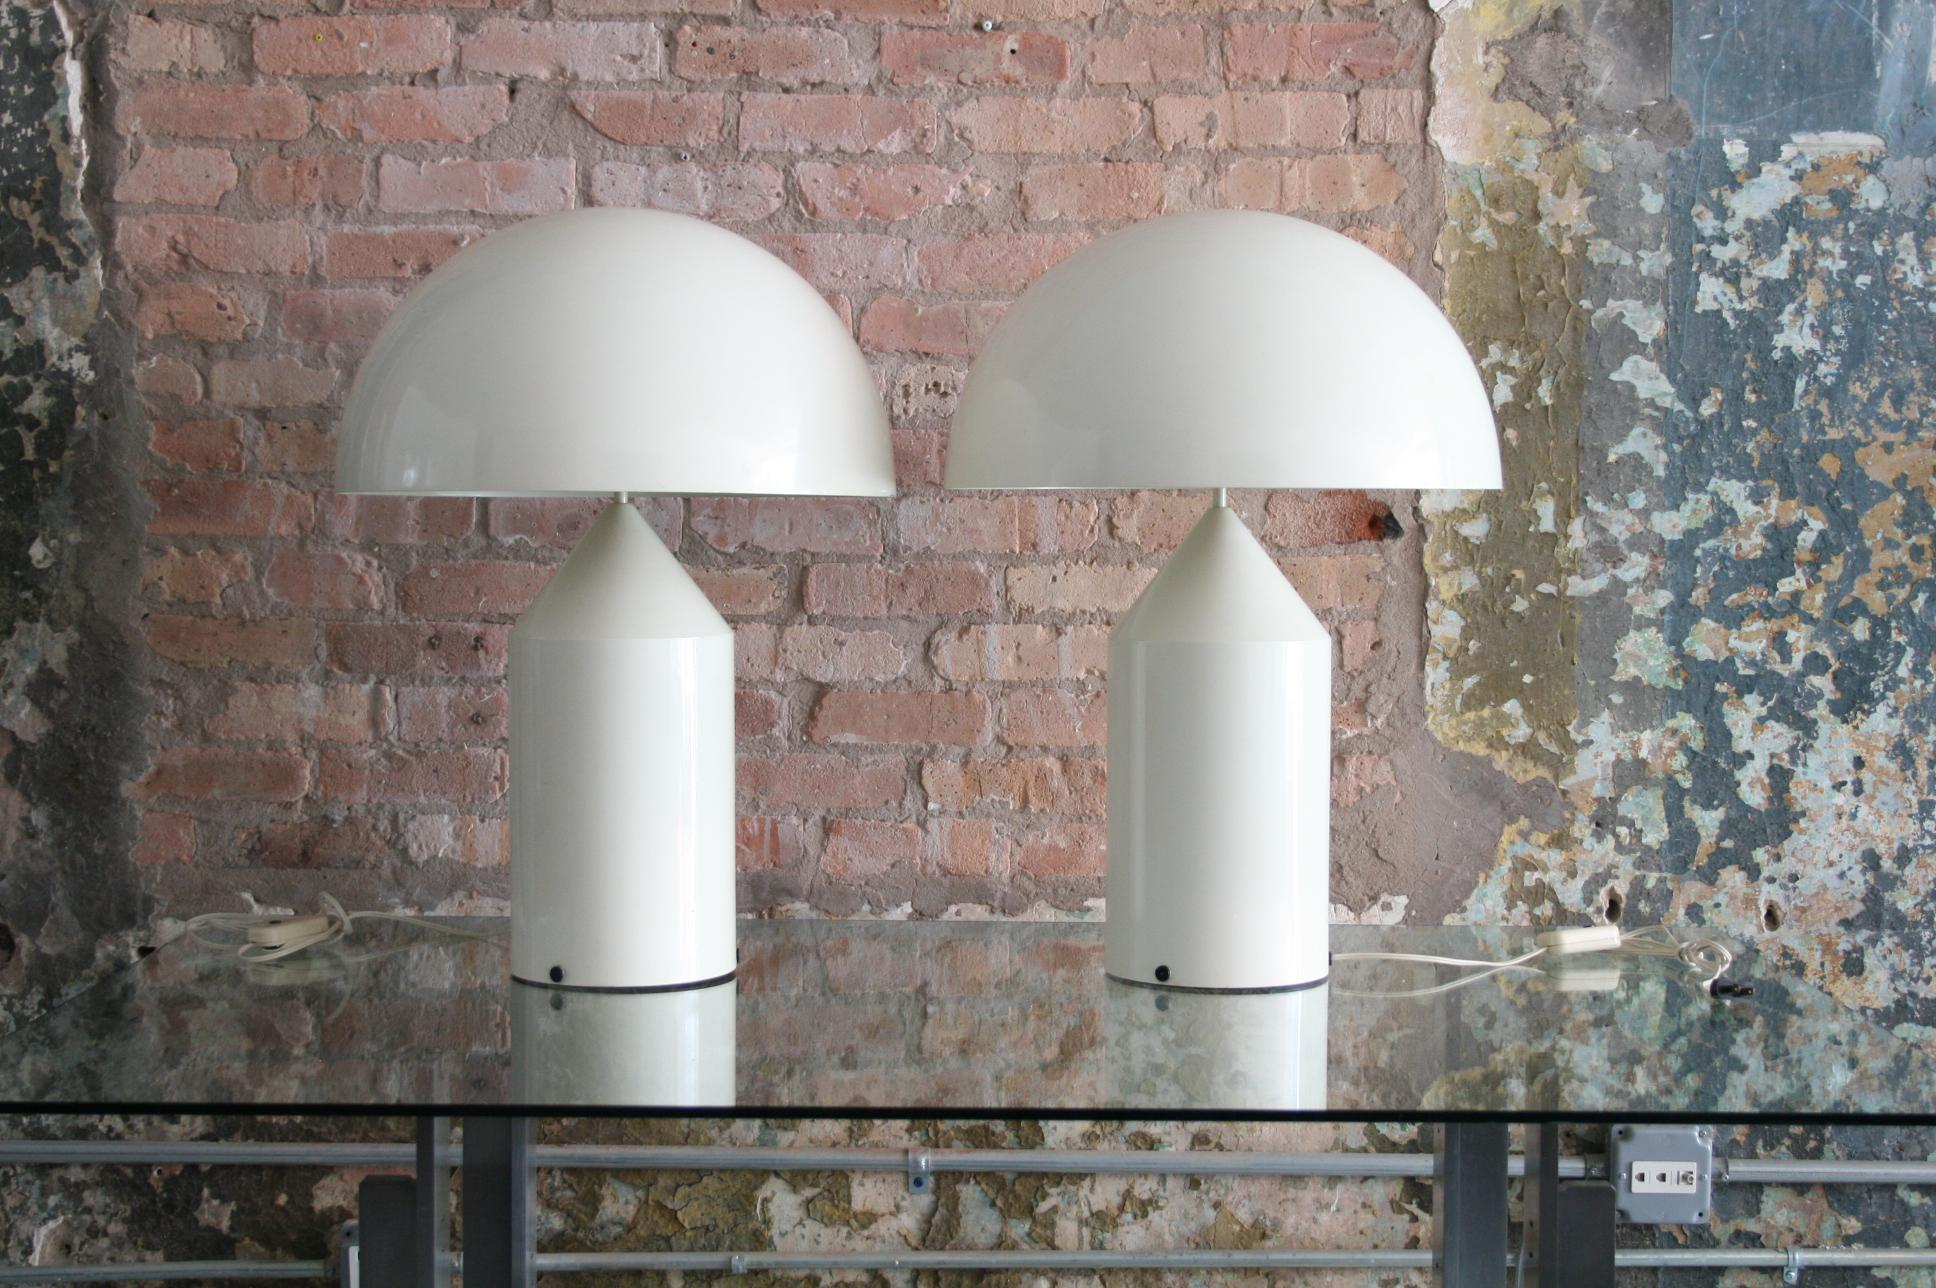 The Atollo table lamp is a strong portrayal of modern design, featuring a bold dome shade on top of a pointed cylinder. The robust and simple nature of the design is absolutely why it has become iconic since its launch in 1977.